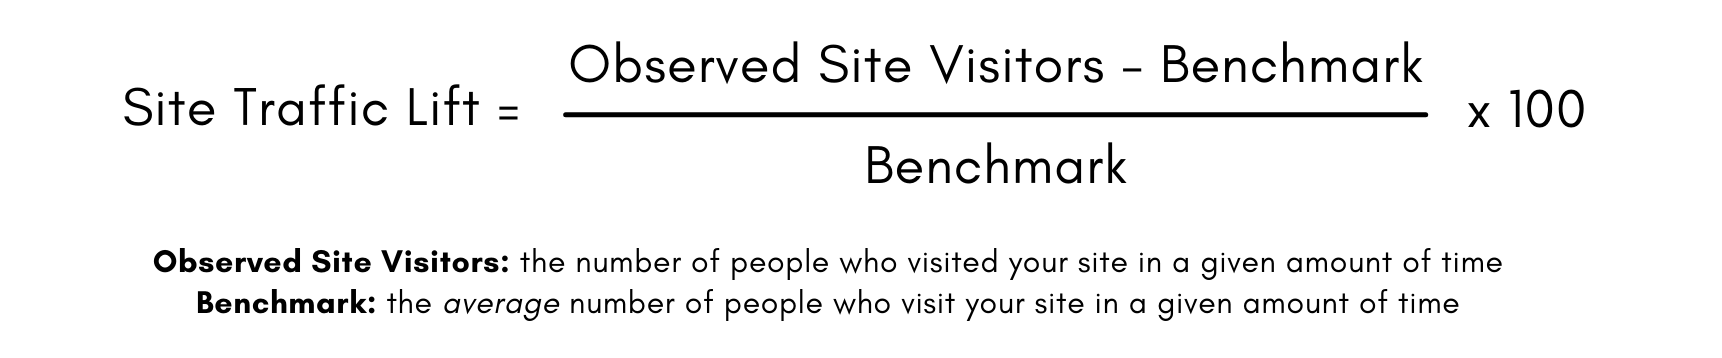 Formula for Site Traffic Lift: Number of Site Visitors minus the benchmark, divided by the benchmark, times 100.